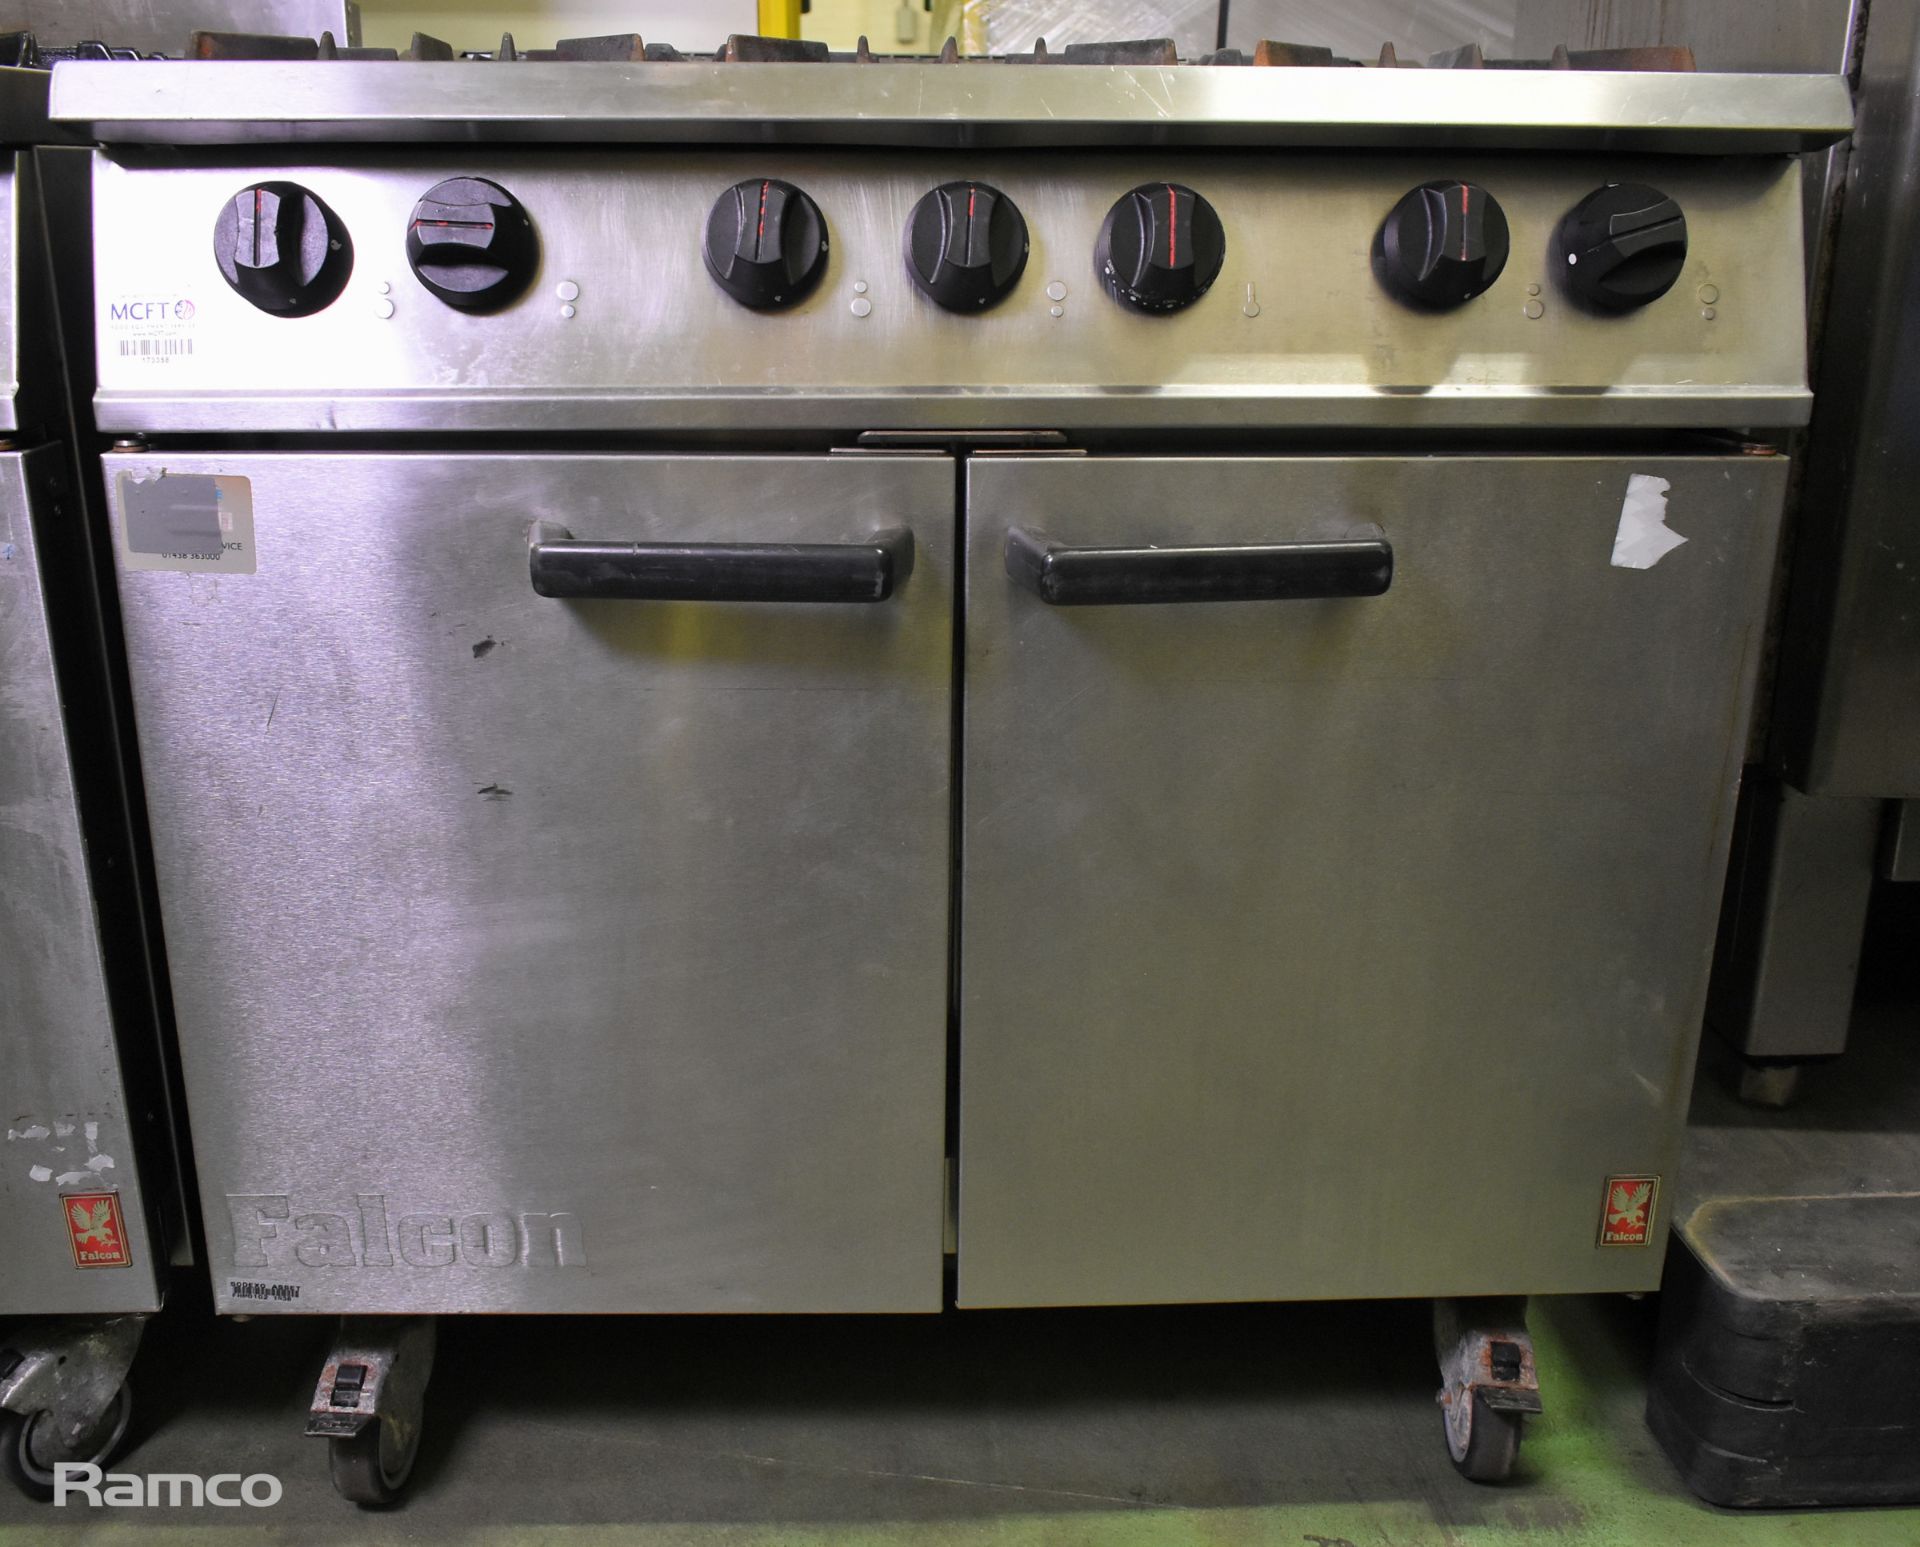 Falcon G3101 stainless steel gas six burner plus oven range - W 900 x D 900 x H 940mm - Image 6 of 7